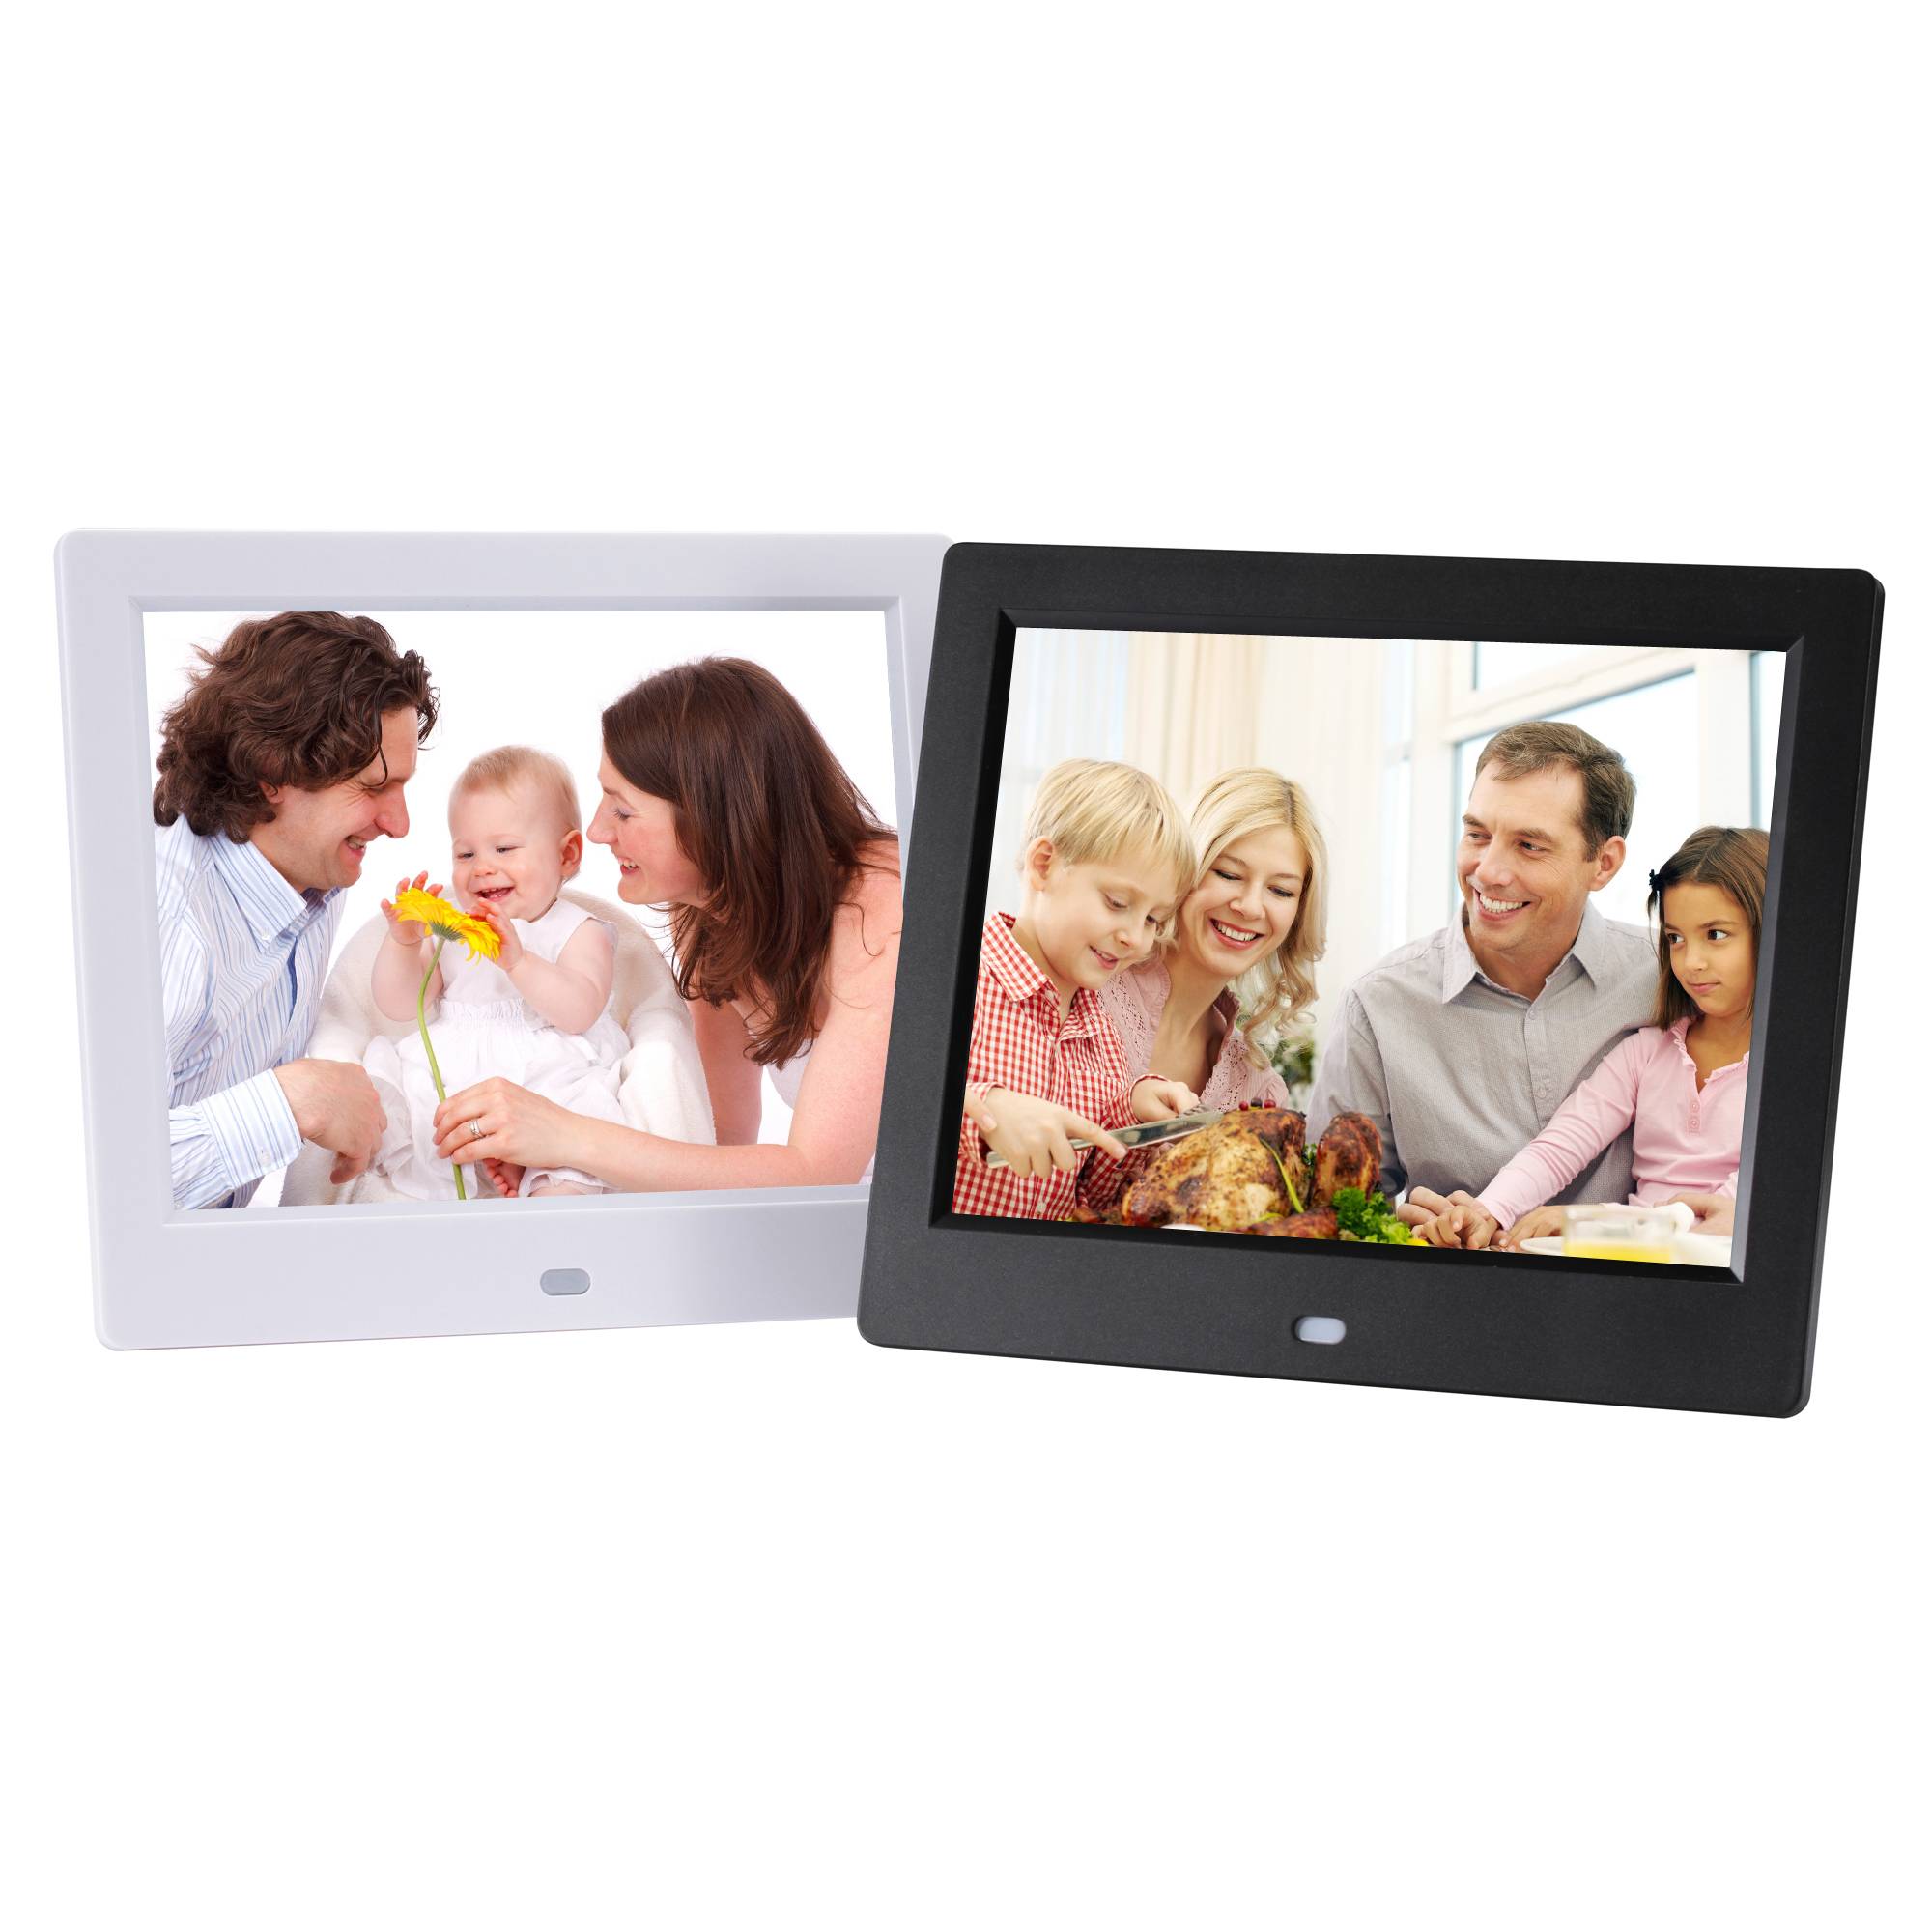 Massive Selection for Portable Touch Screen Monitor - 8 inch slideshow cheap video player digital picture frame digital photo frame commercial advertising HD support 720P – Idealway